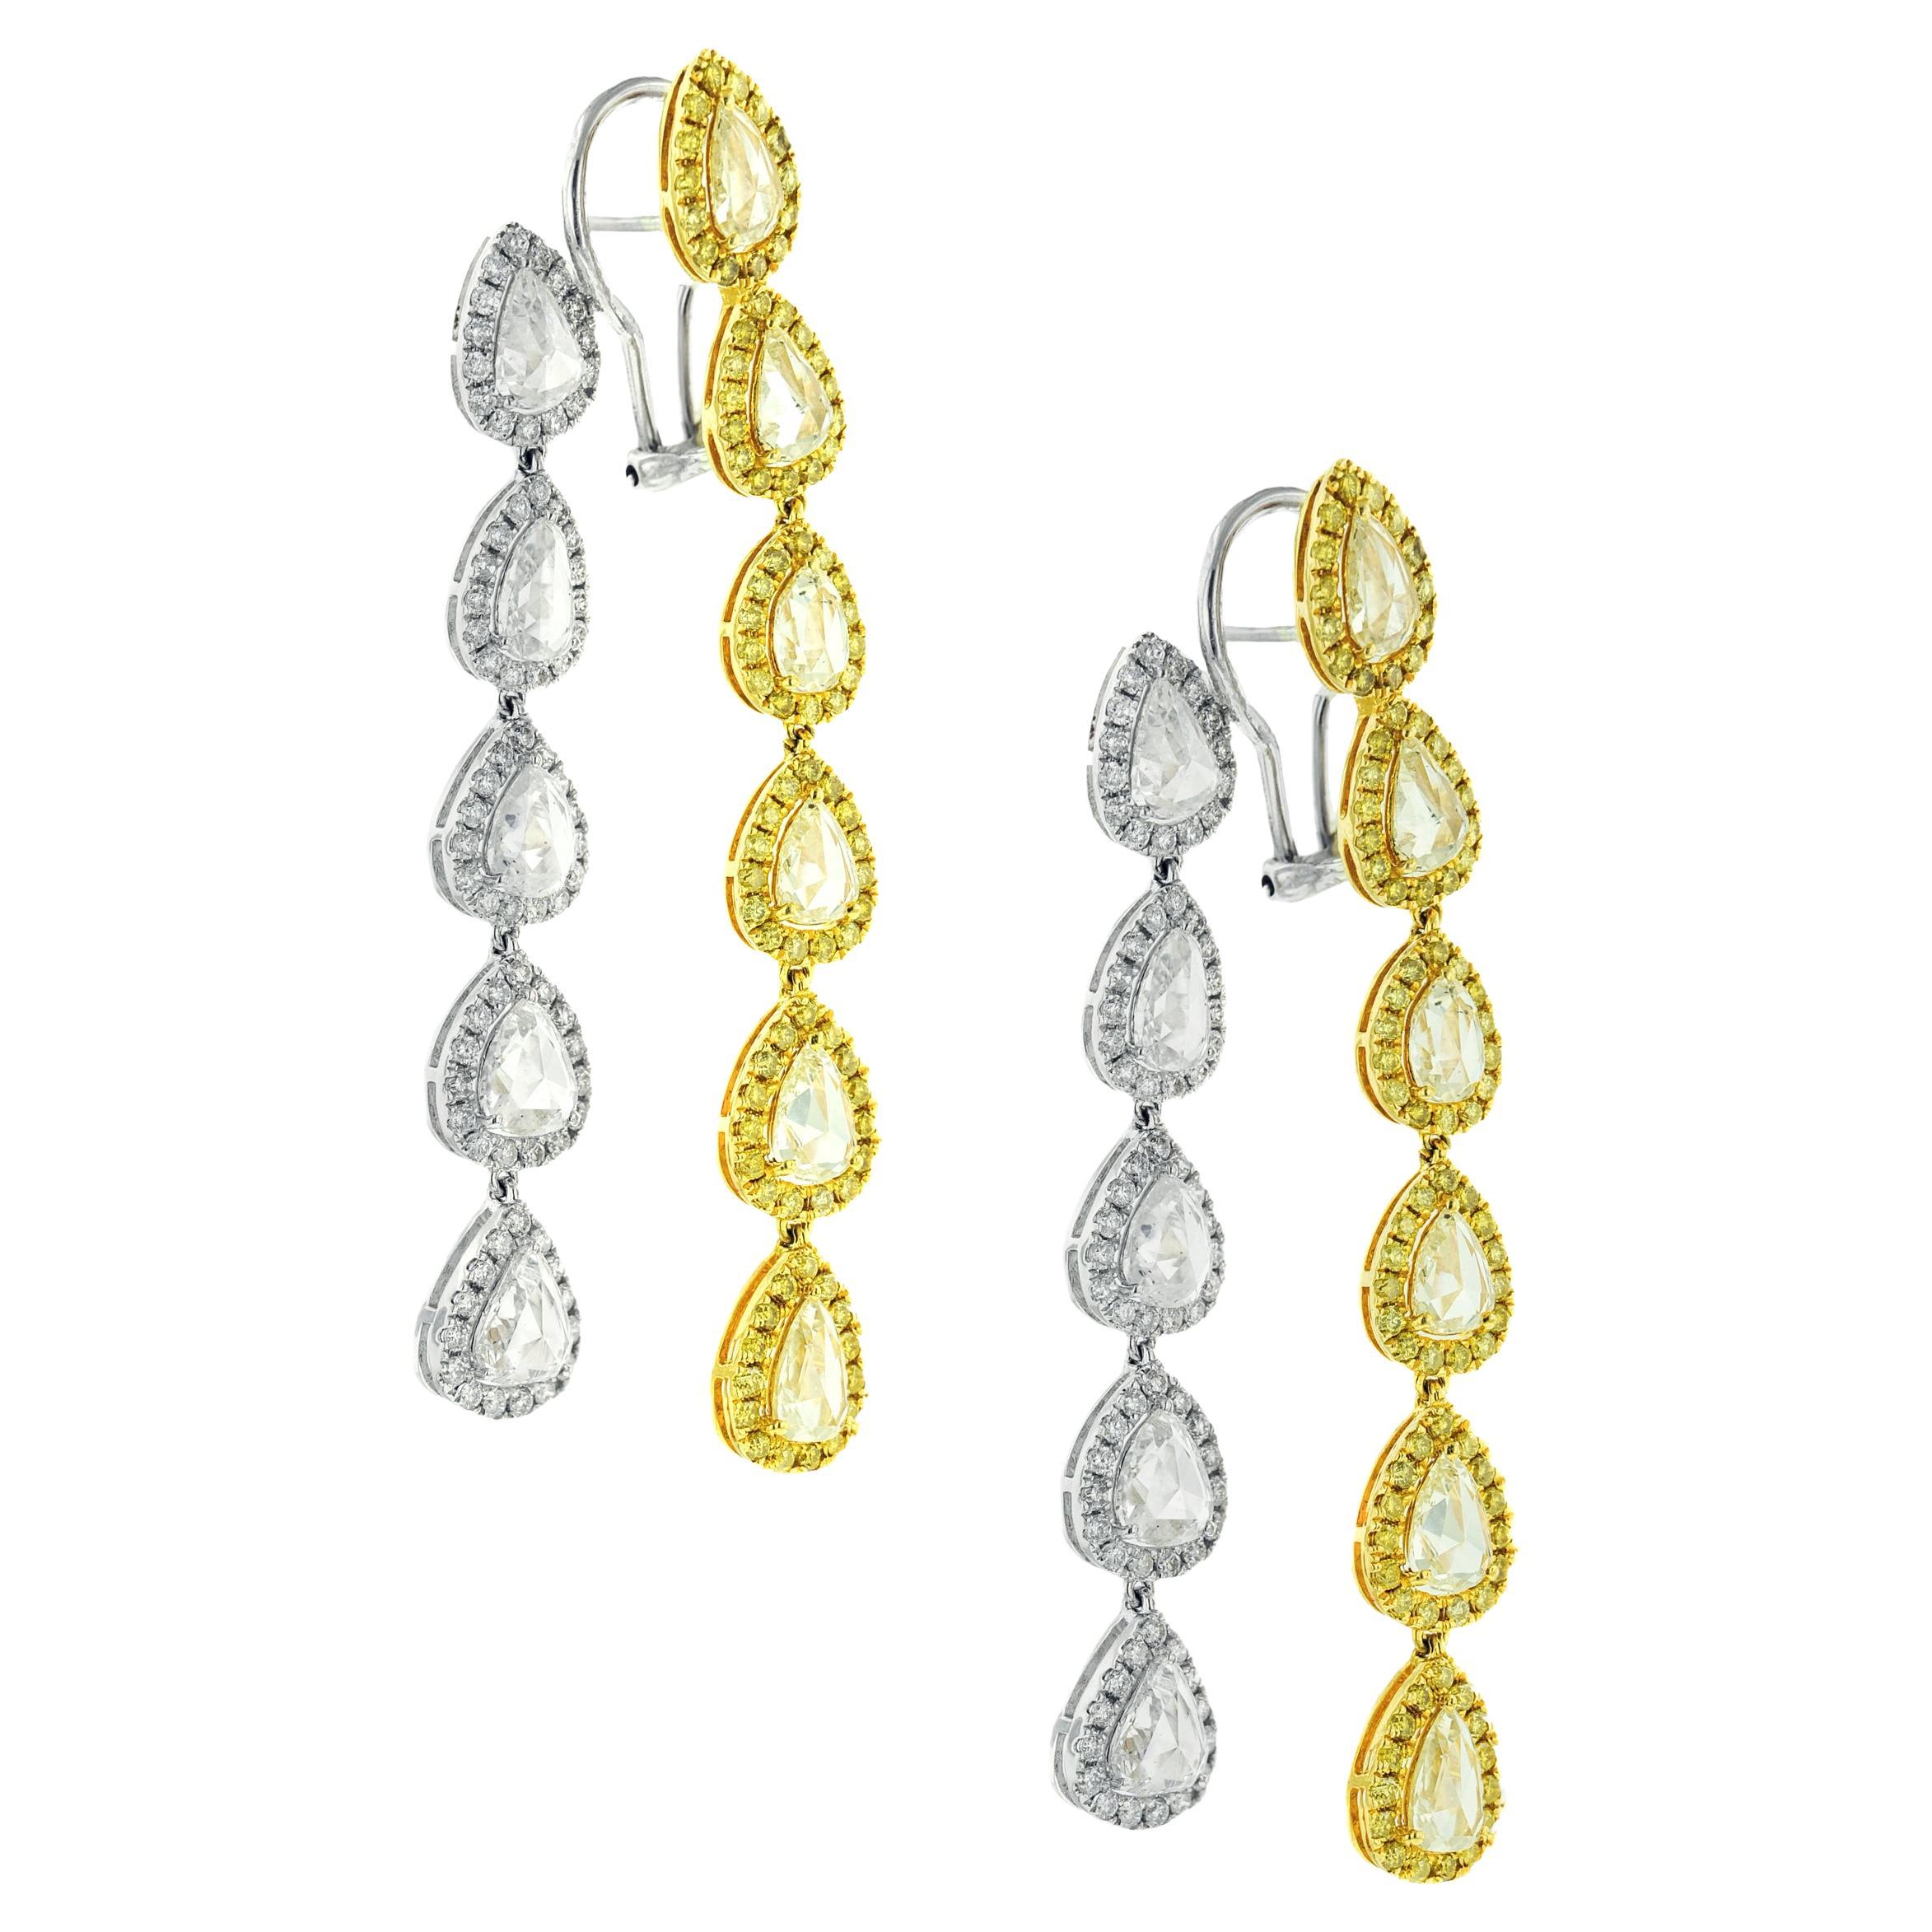 Diana M. 18 kt white and yellow gold earrings adorned with 13.61 ct of Rose Cut  For Sale